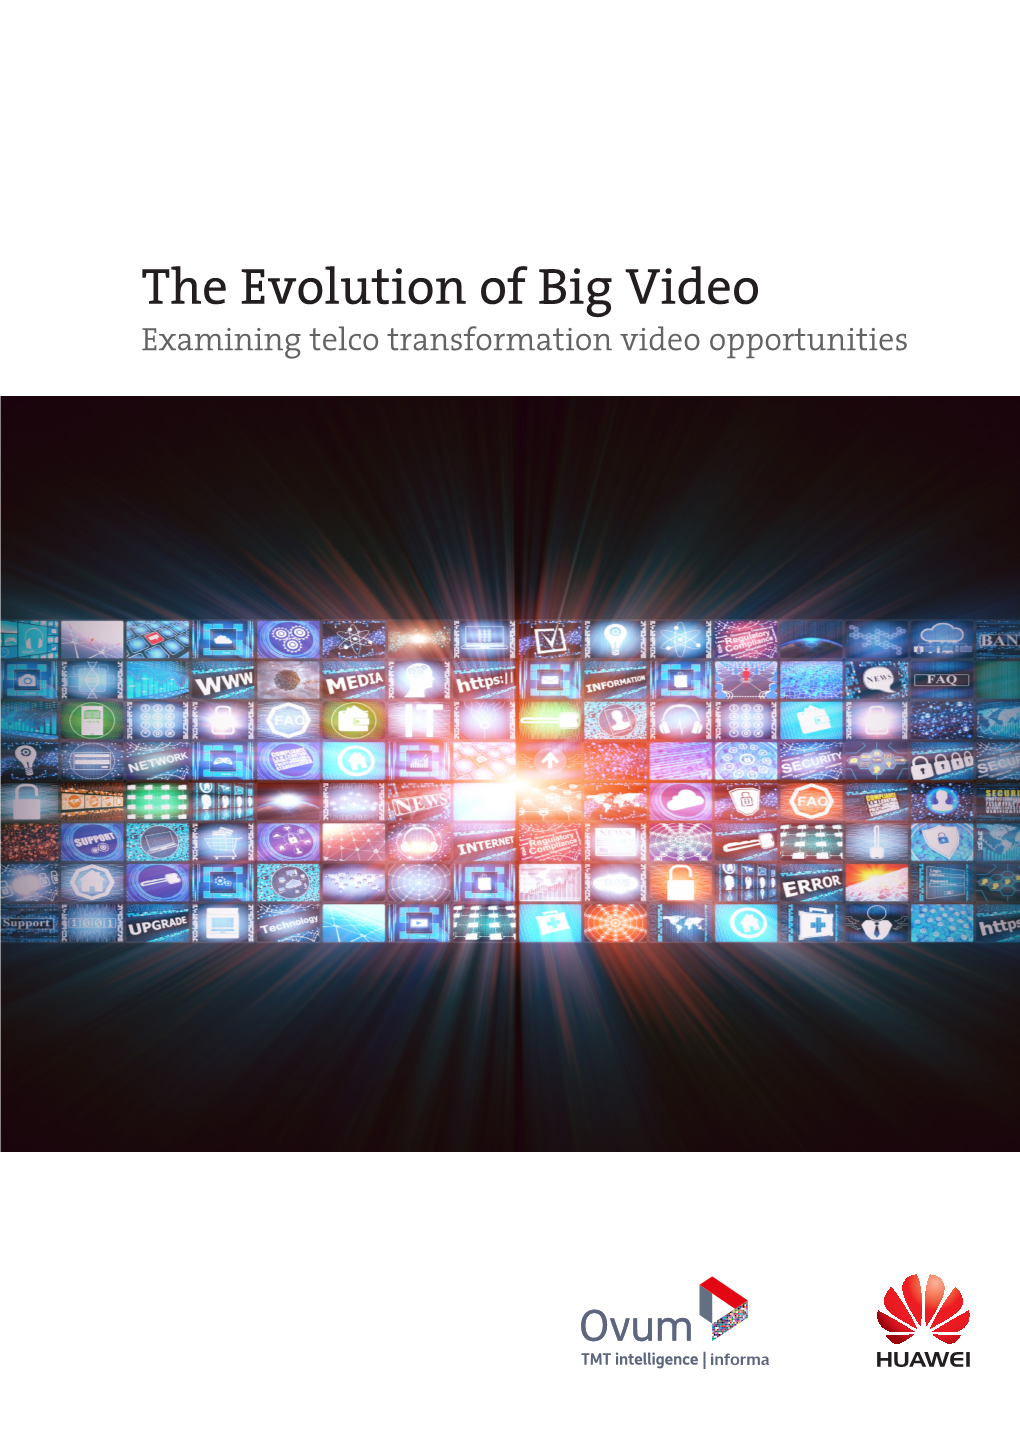 The Evolution of Big Video Examining Telco Transformation Video Opportunities